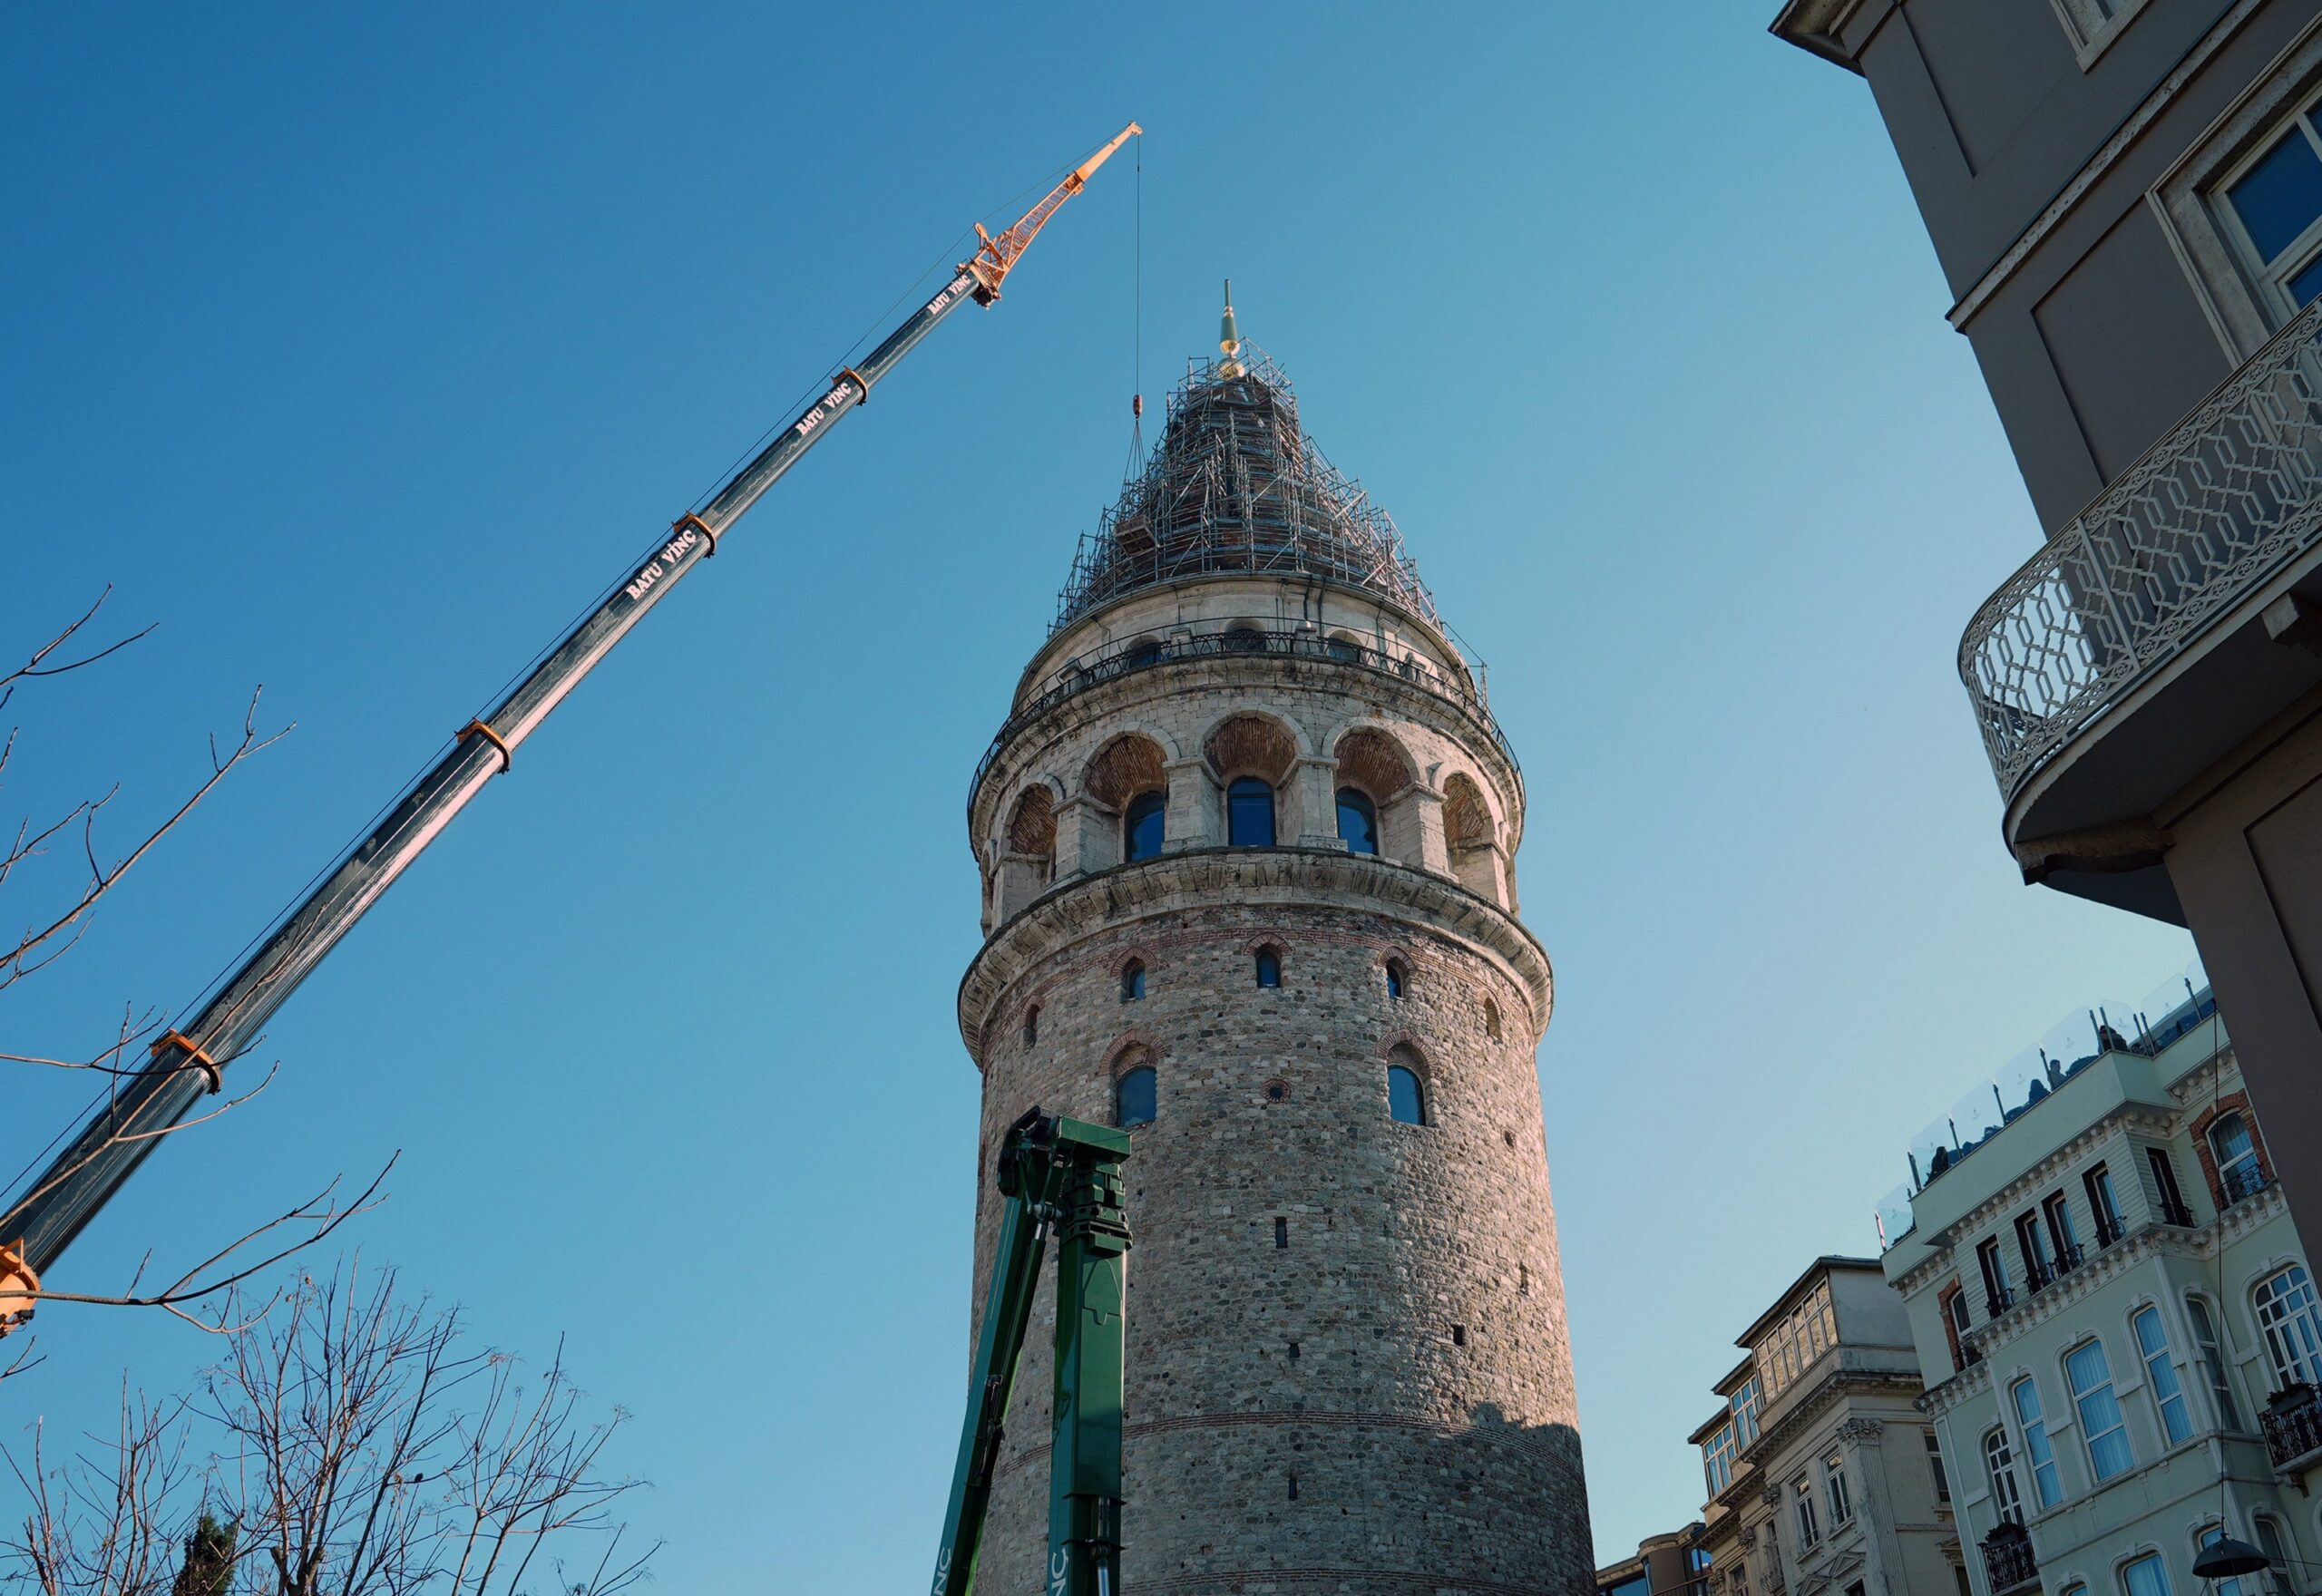 Istanbul’s Galata Tower temporarily closed for restoration work